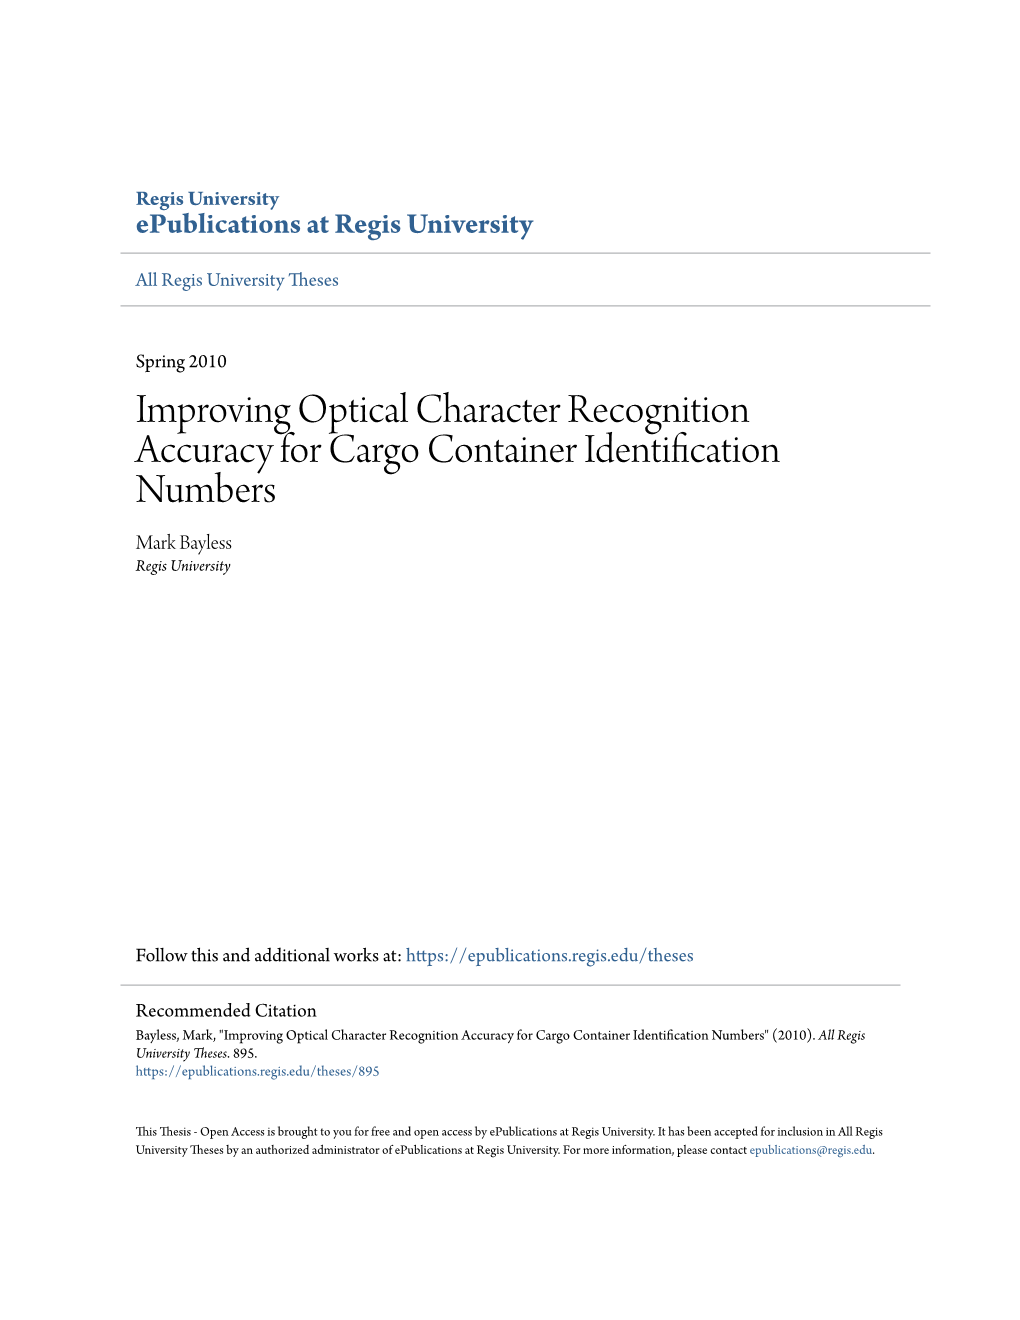 Improving Optical Character Recognition Accuracy for Cargo Container Identification Numbers Mark Bayless Regis University